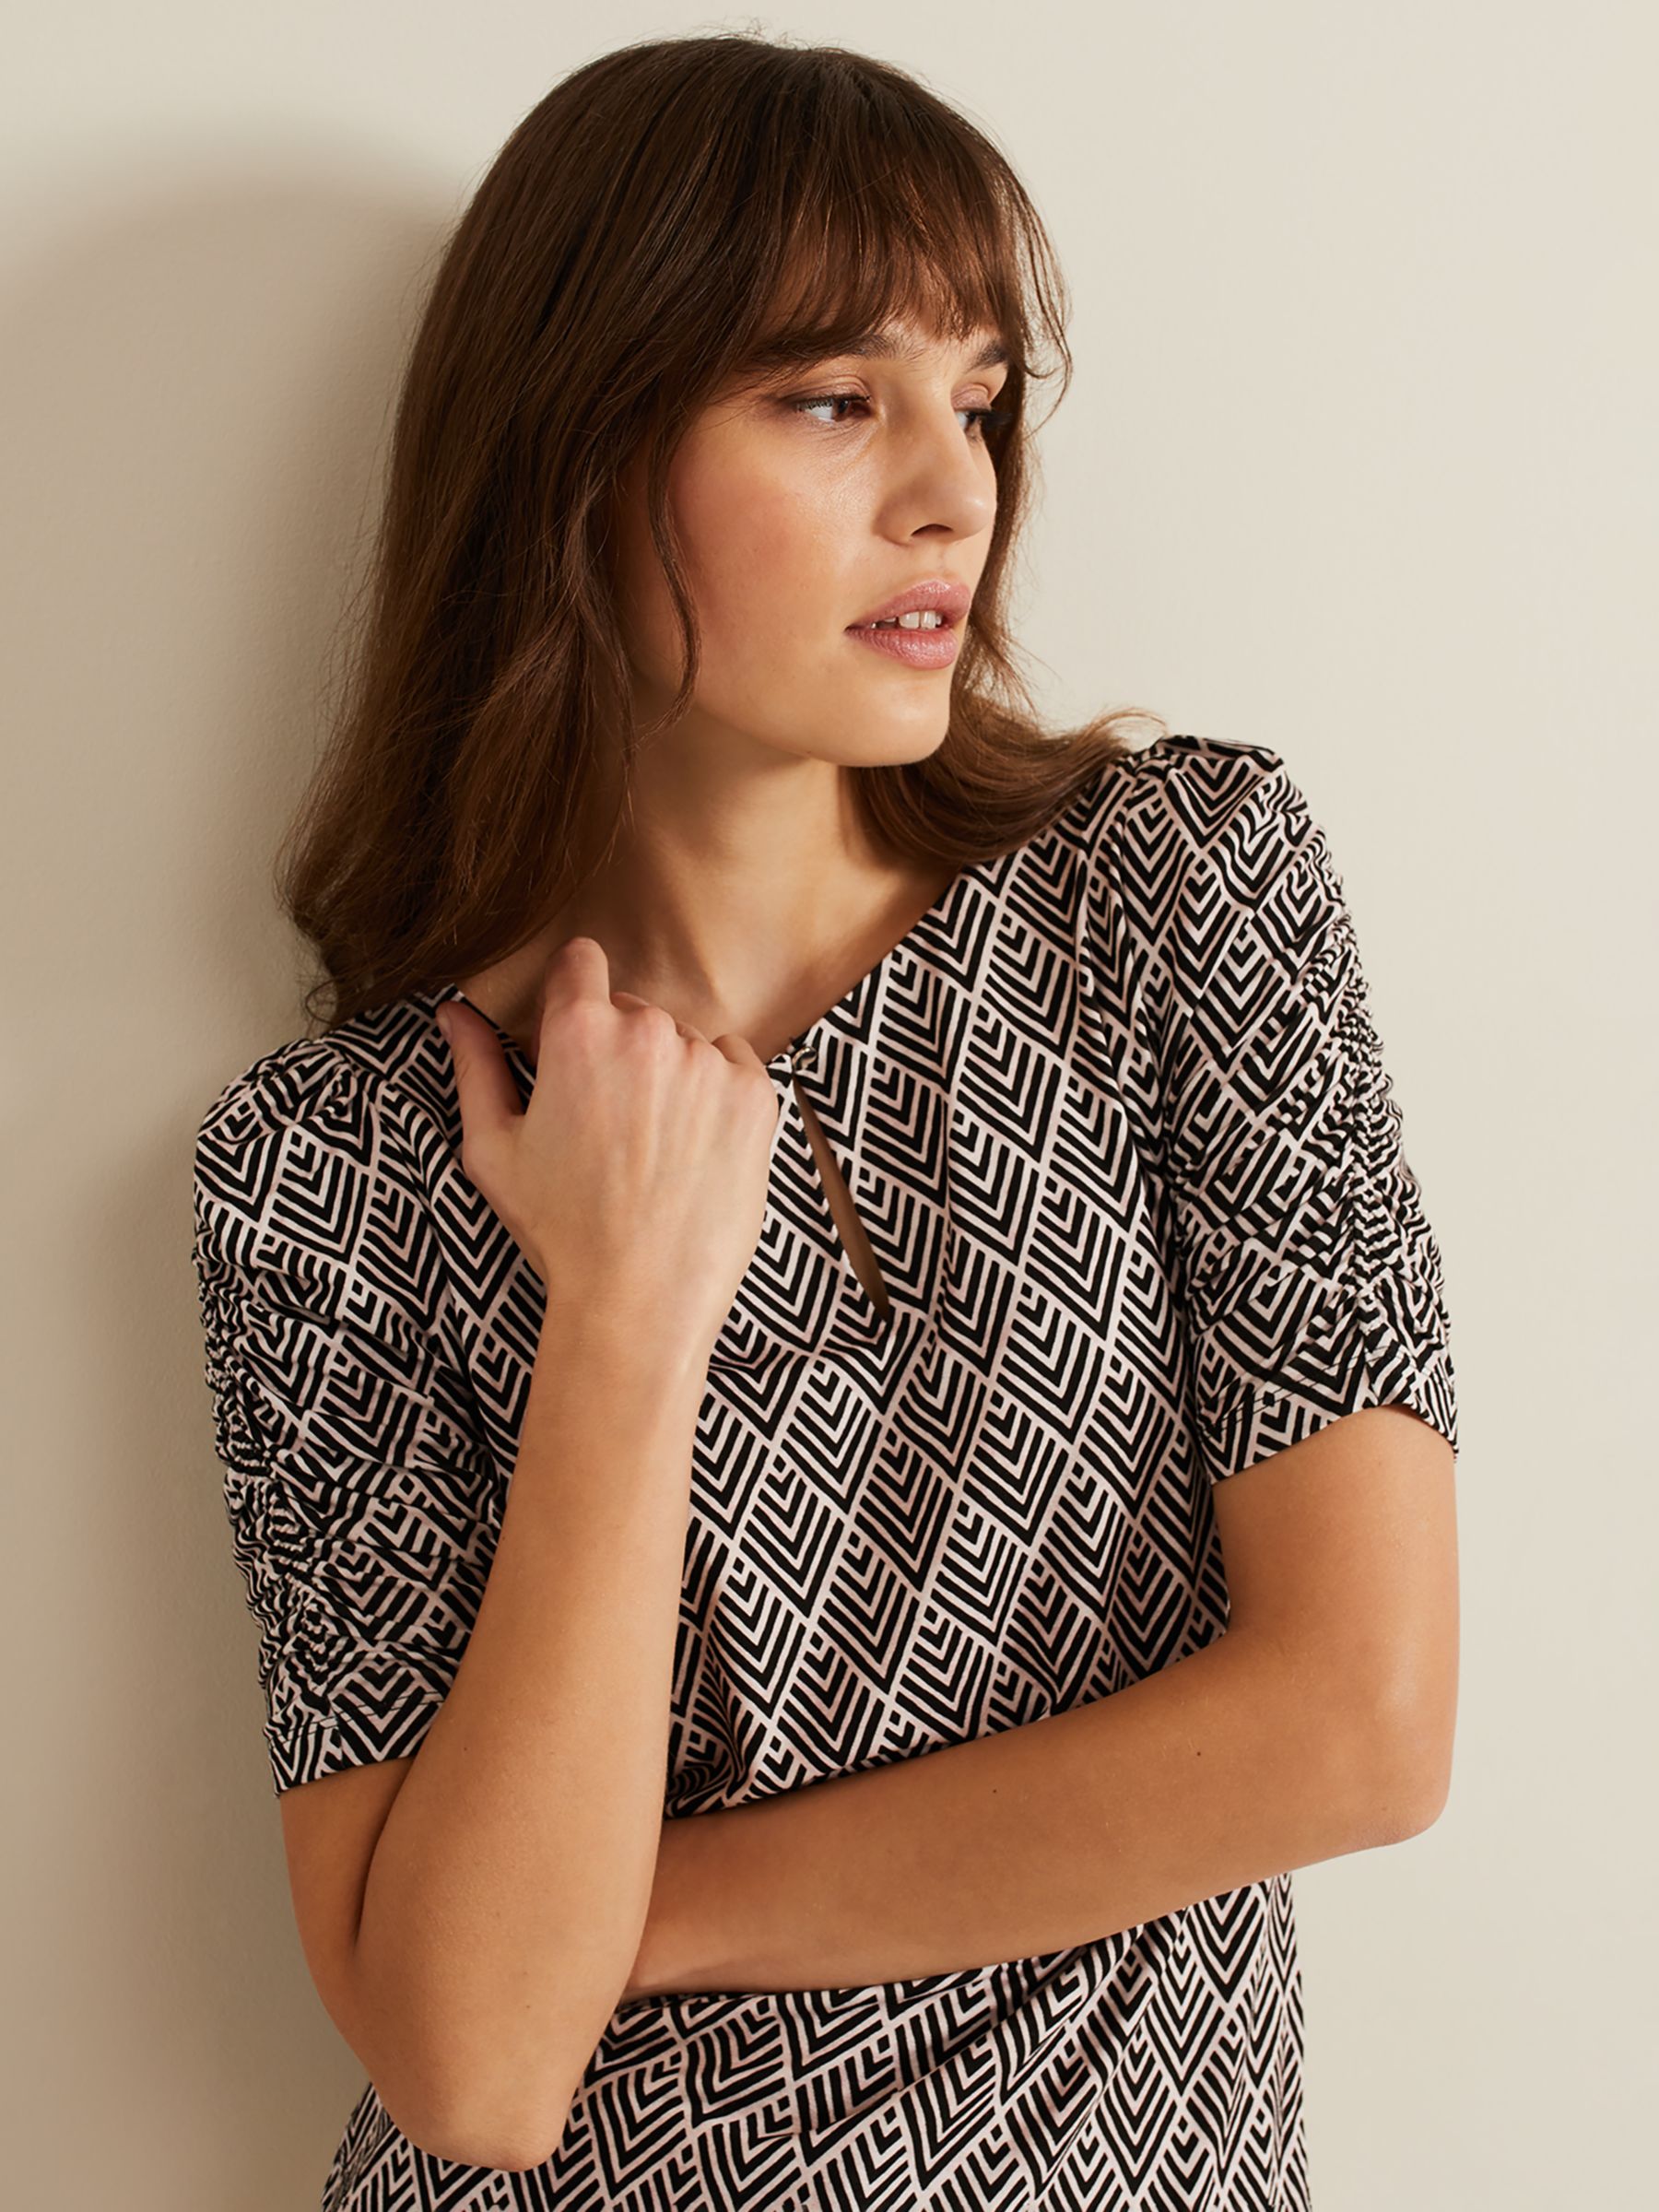 Buy Phase Eight Evelyn Geometric Print Top, Black/White Online at johnlewis.com